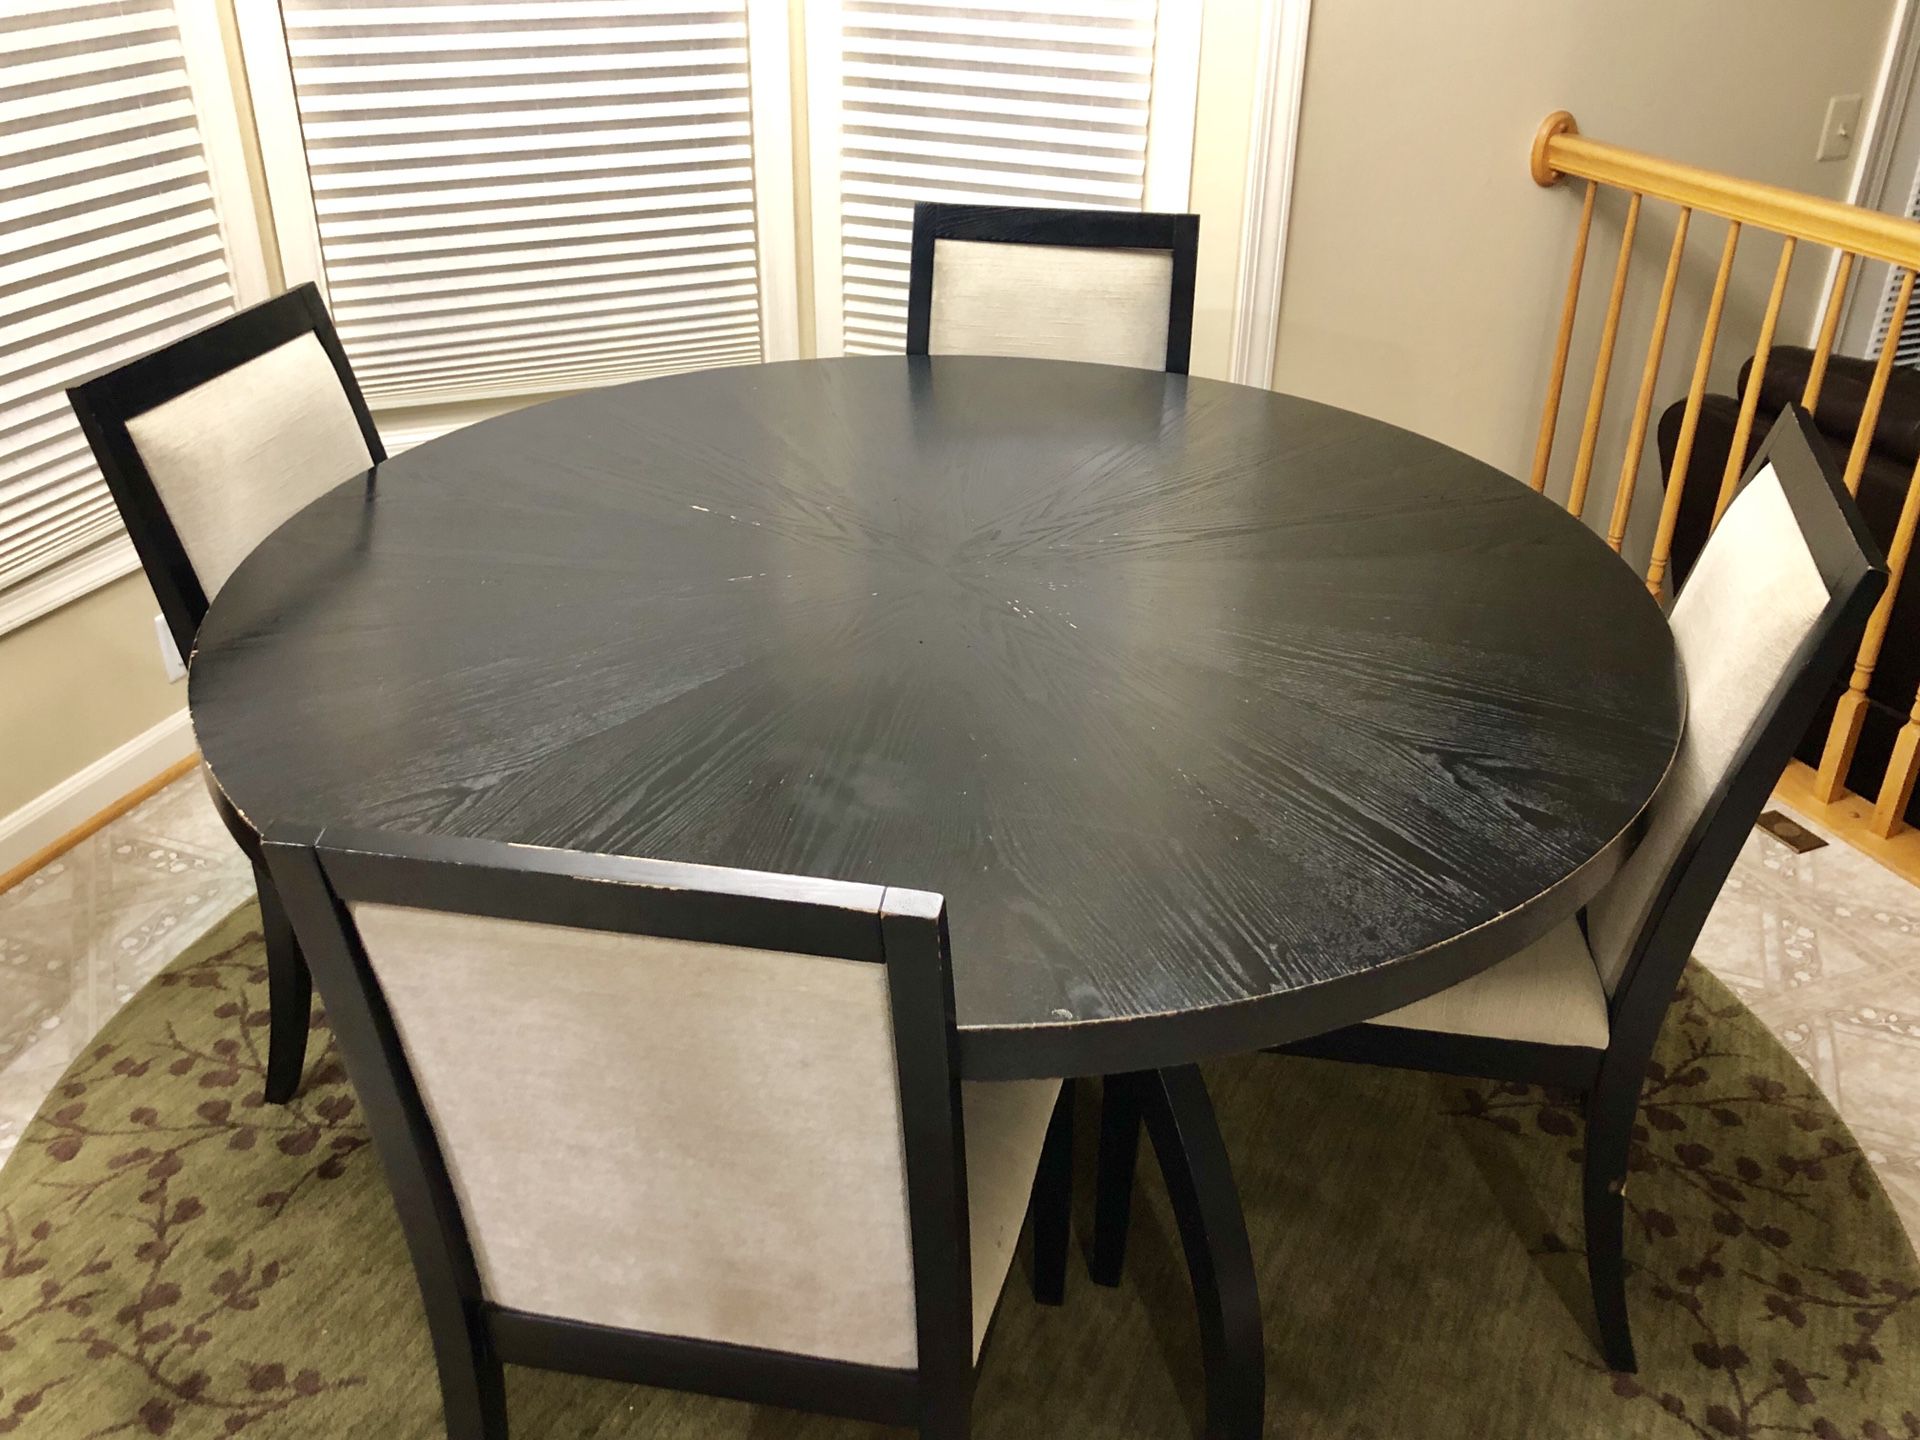 Dining table set (table with 4 chairs) 275OBO